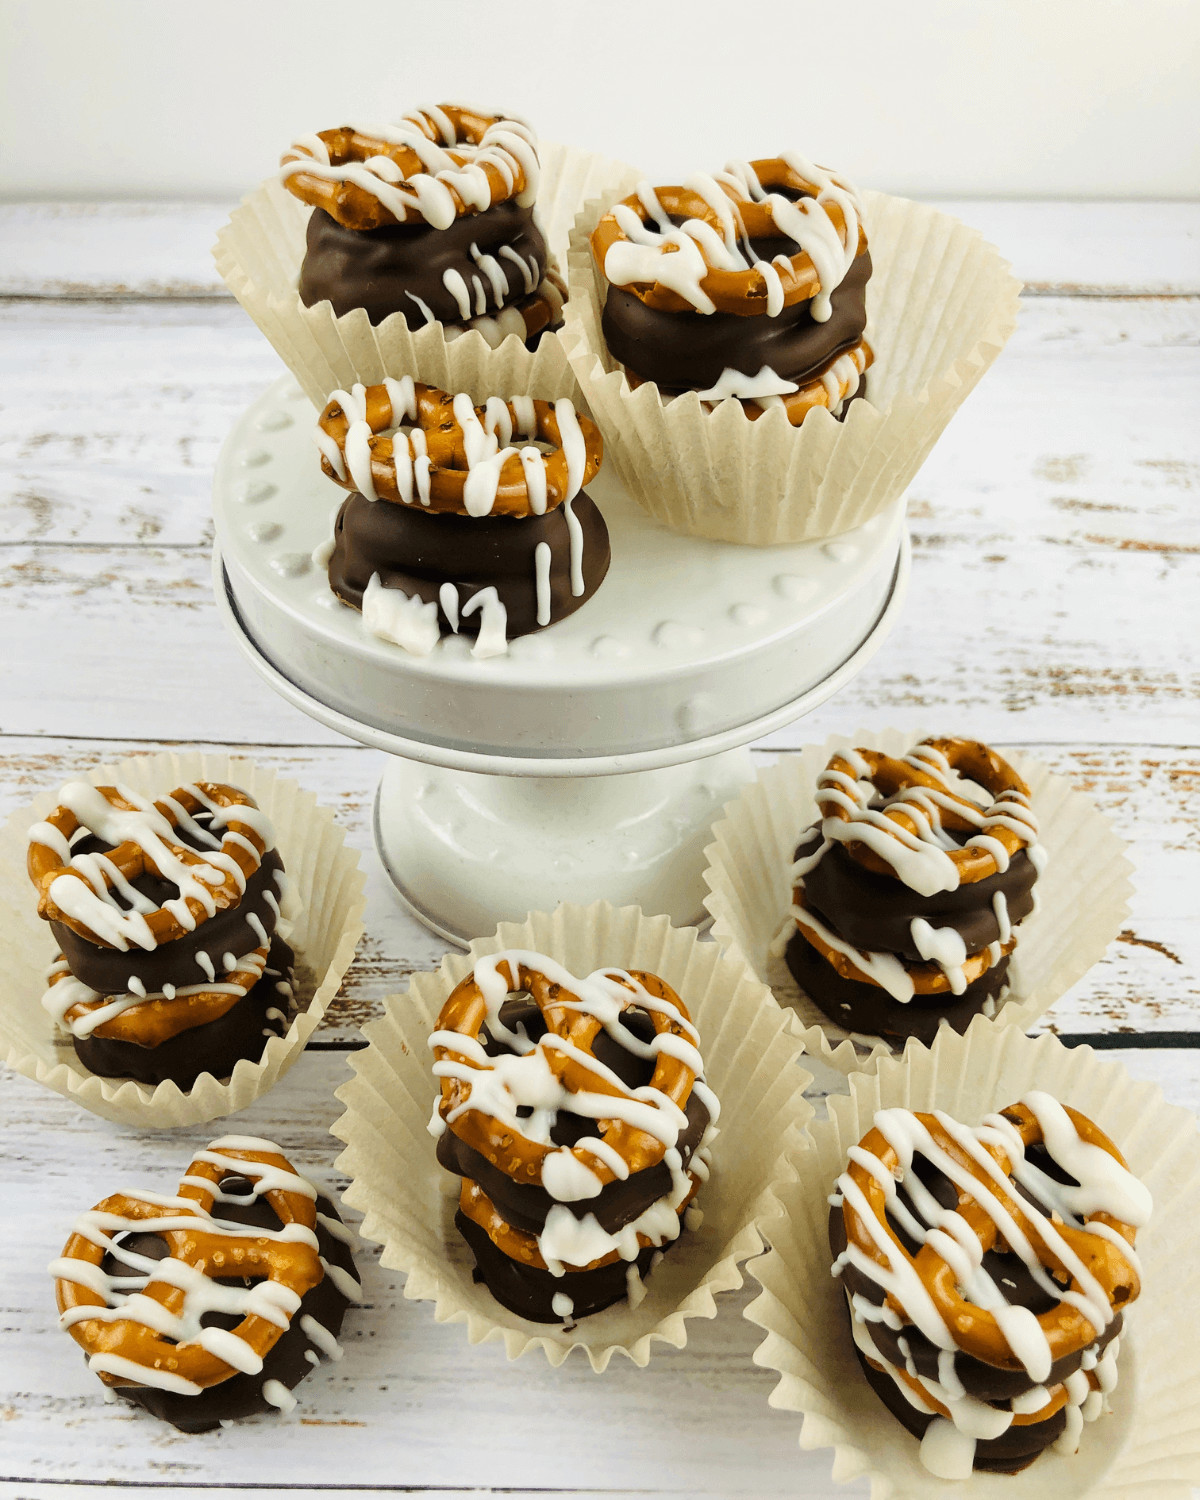 The caramel chocolate pretzels in paper cups.